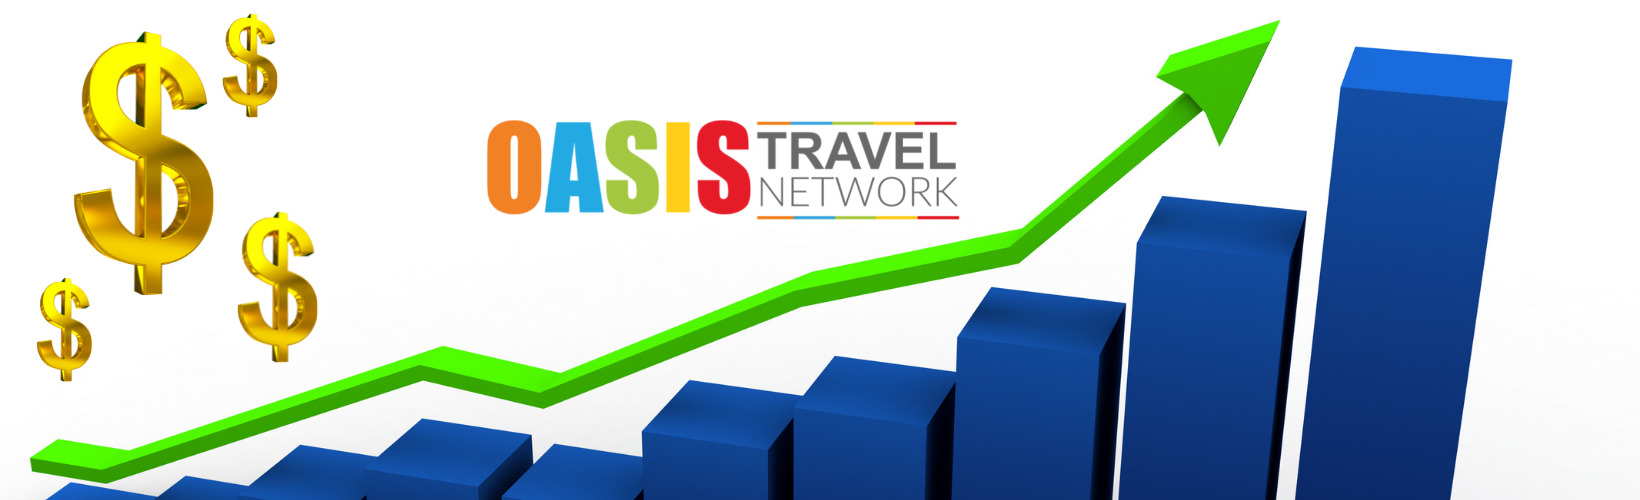 travel wide associated sales